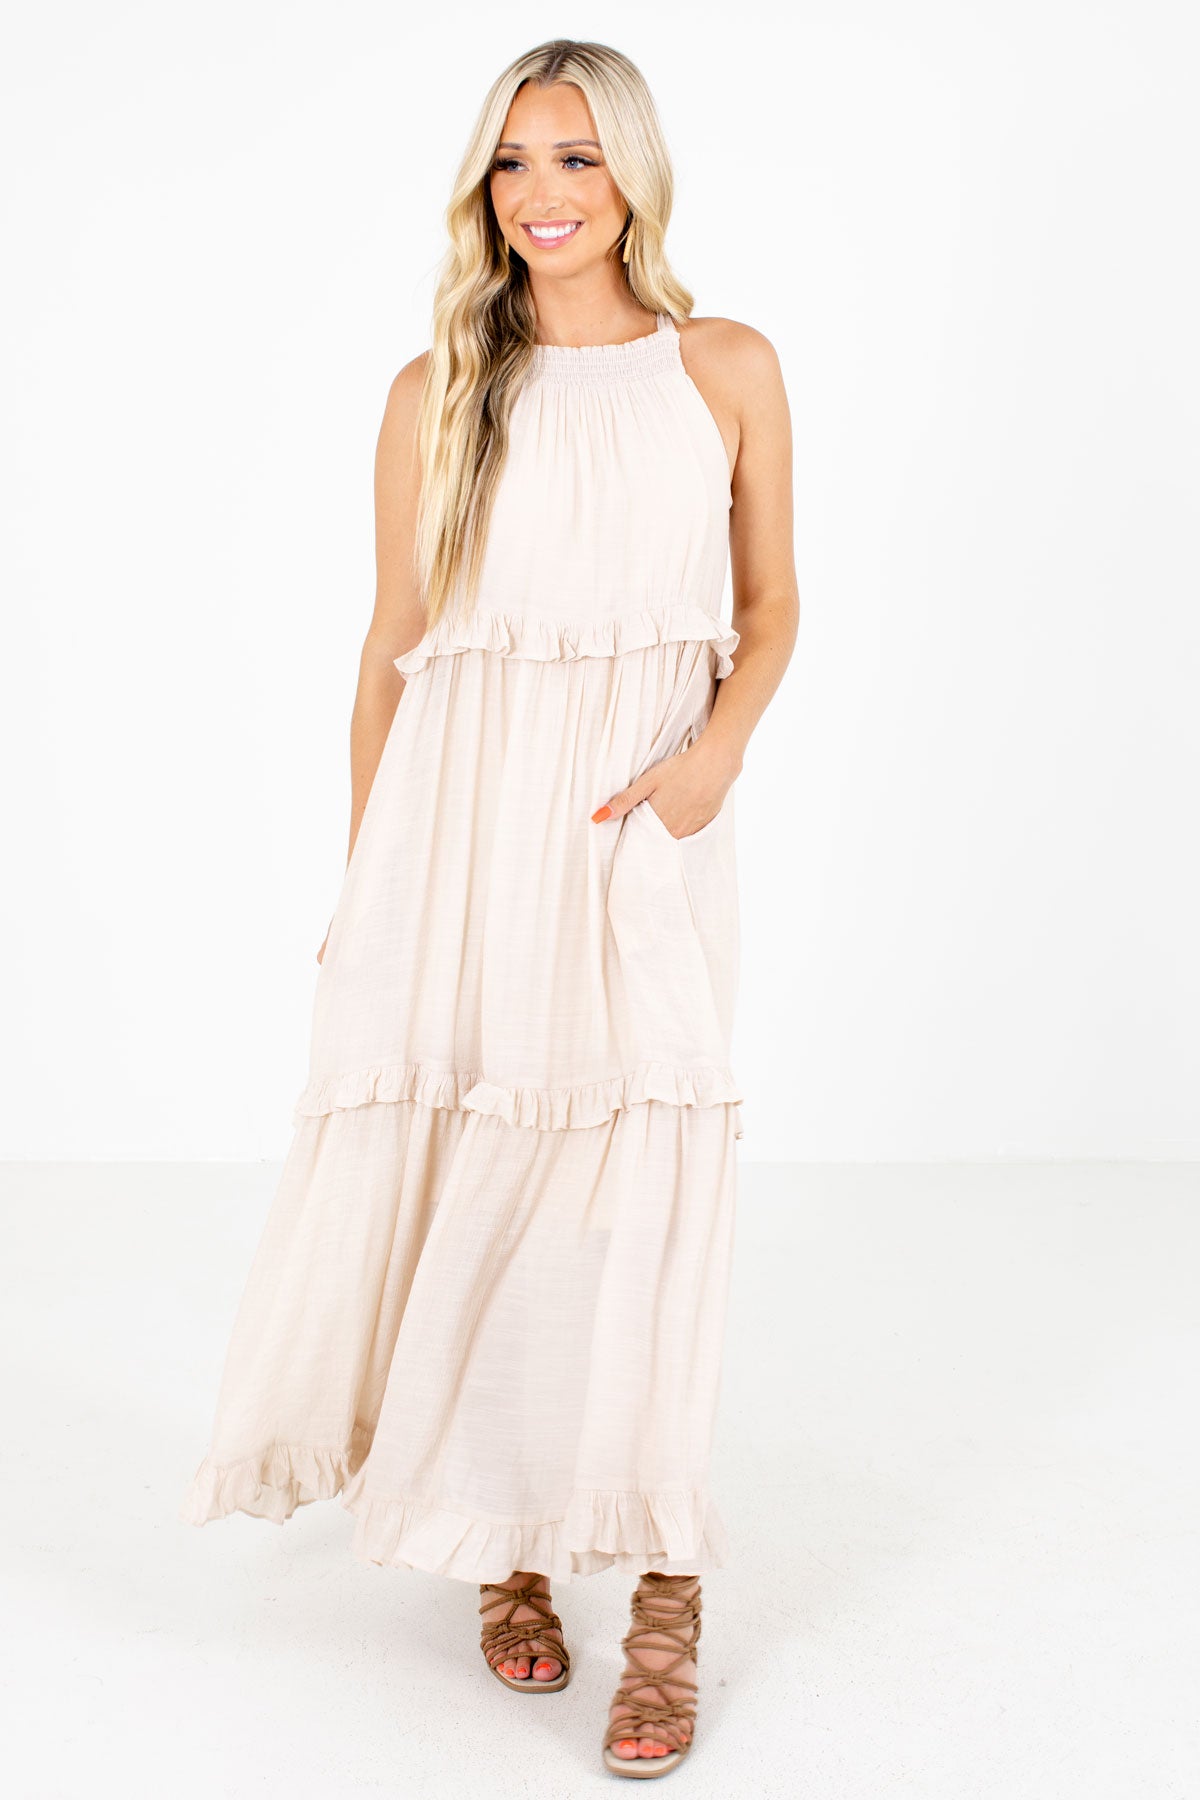 Beige Boutique Maxi Dress with Pockets for Women